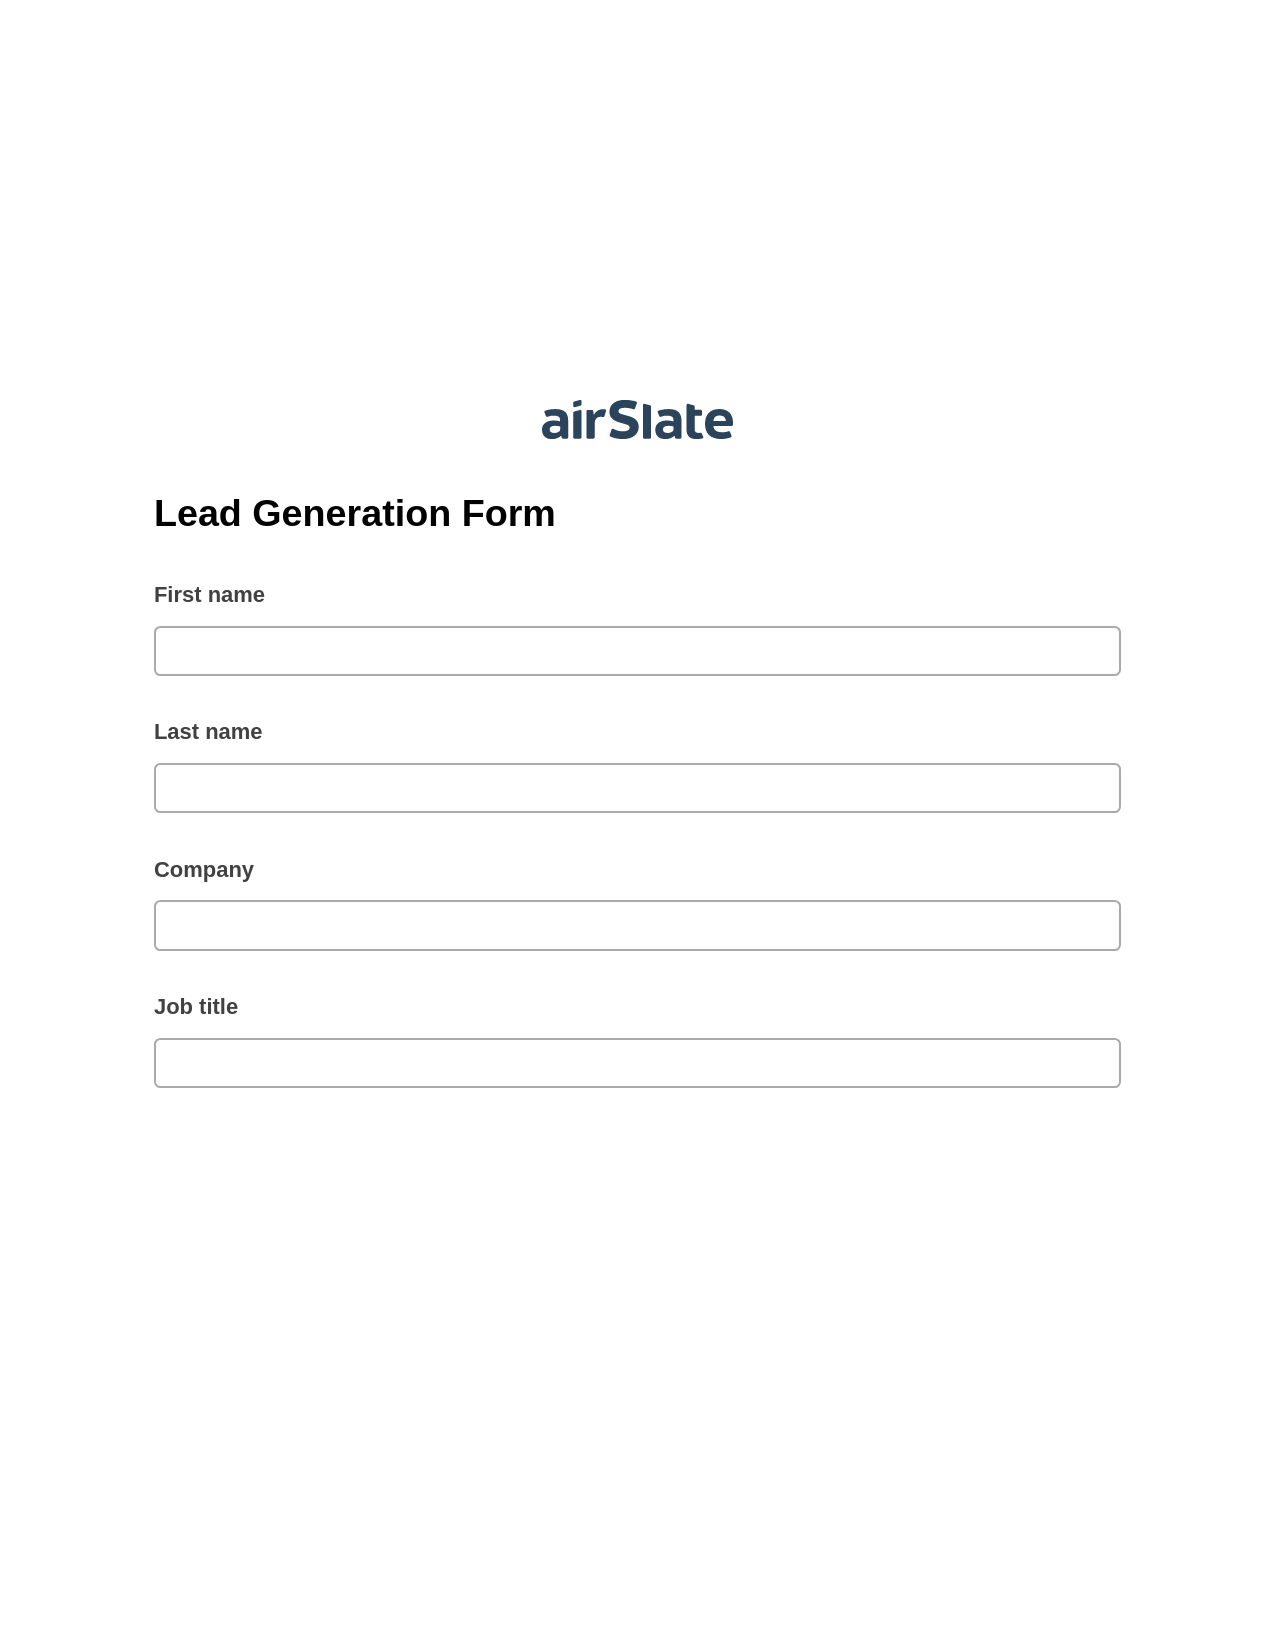 Lead Generation Form Pre-fill from Litmos bot, Send a Slate with Roles Bot, Export to Smartsheet